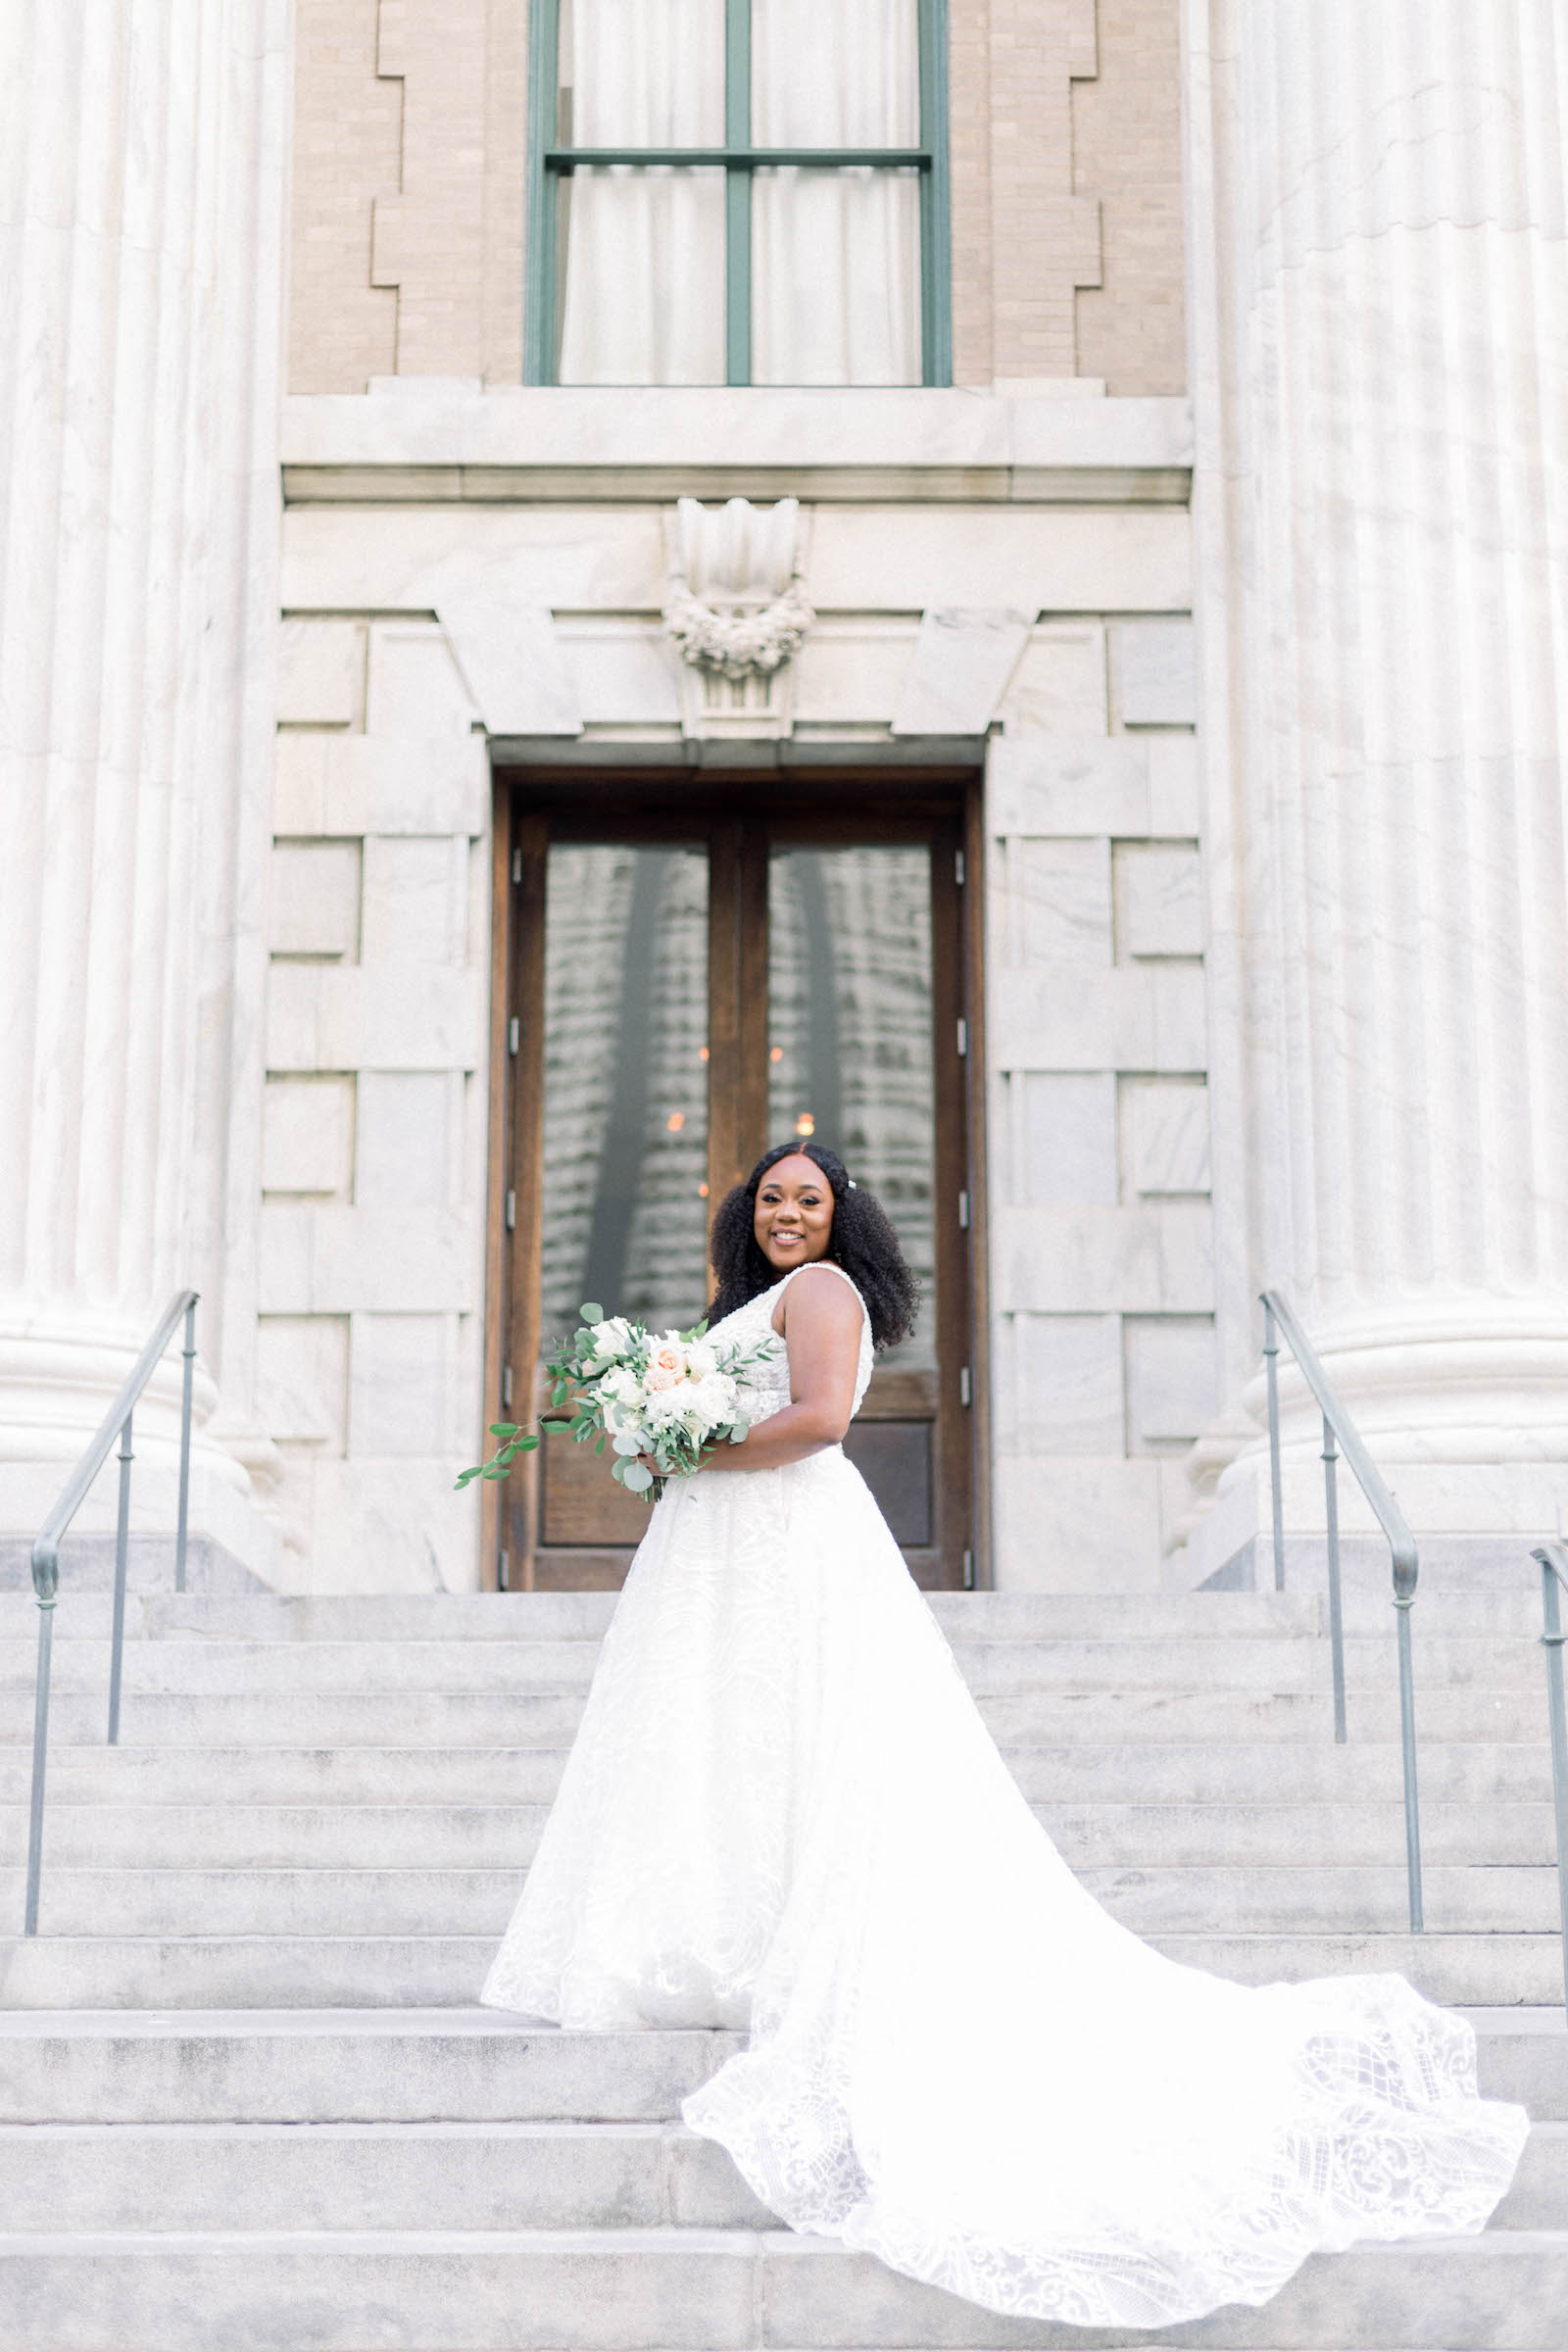 Bride on Steps in Long Train Ballgown and White Floral Bouquet with Greenery Wedding Portrait